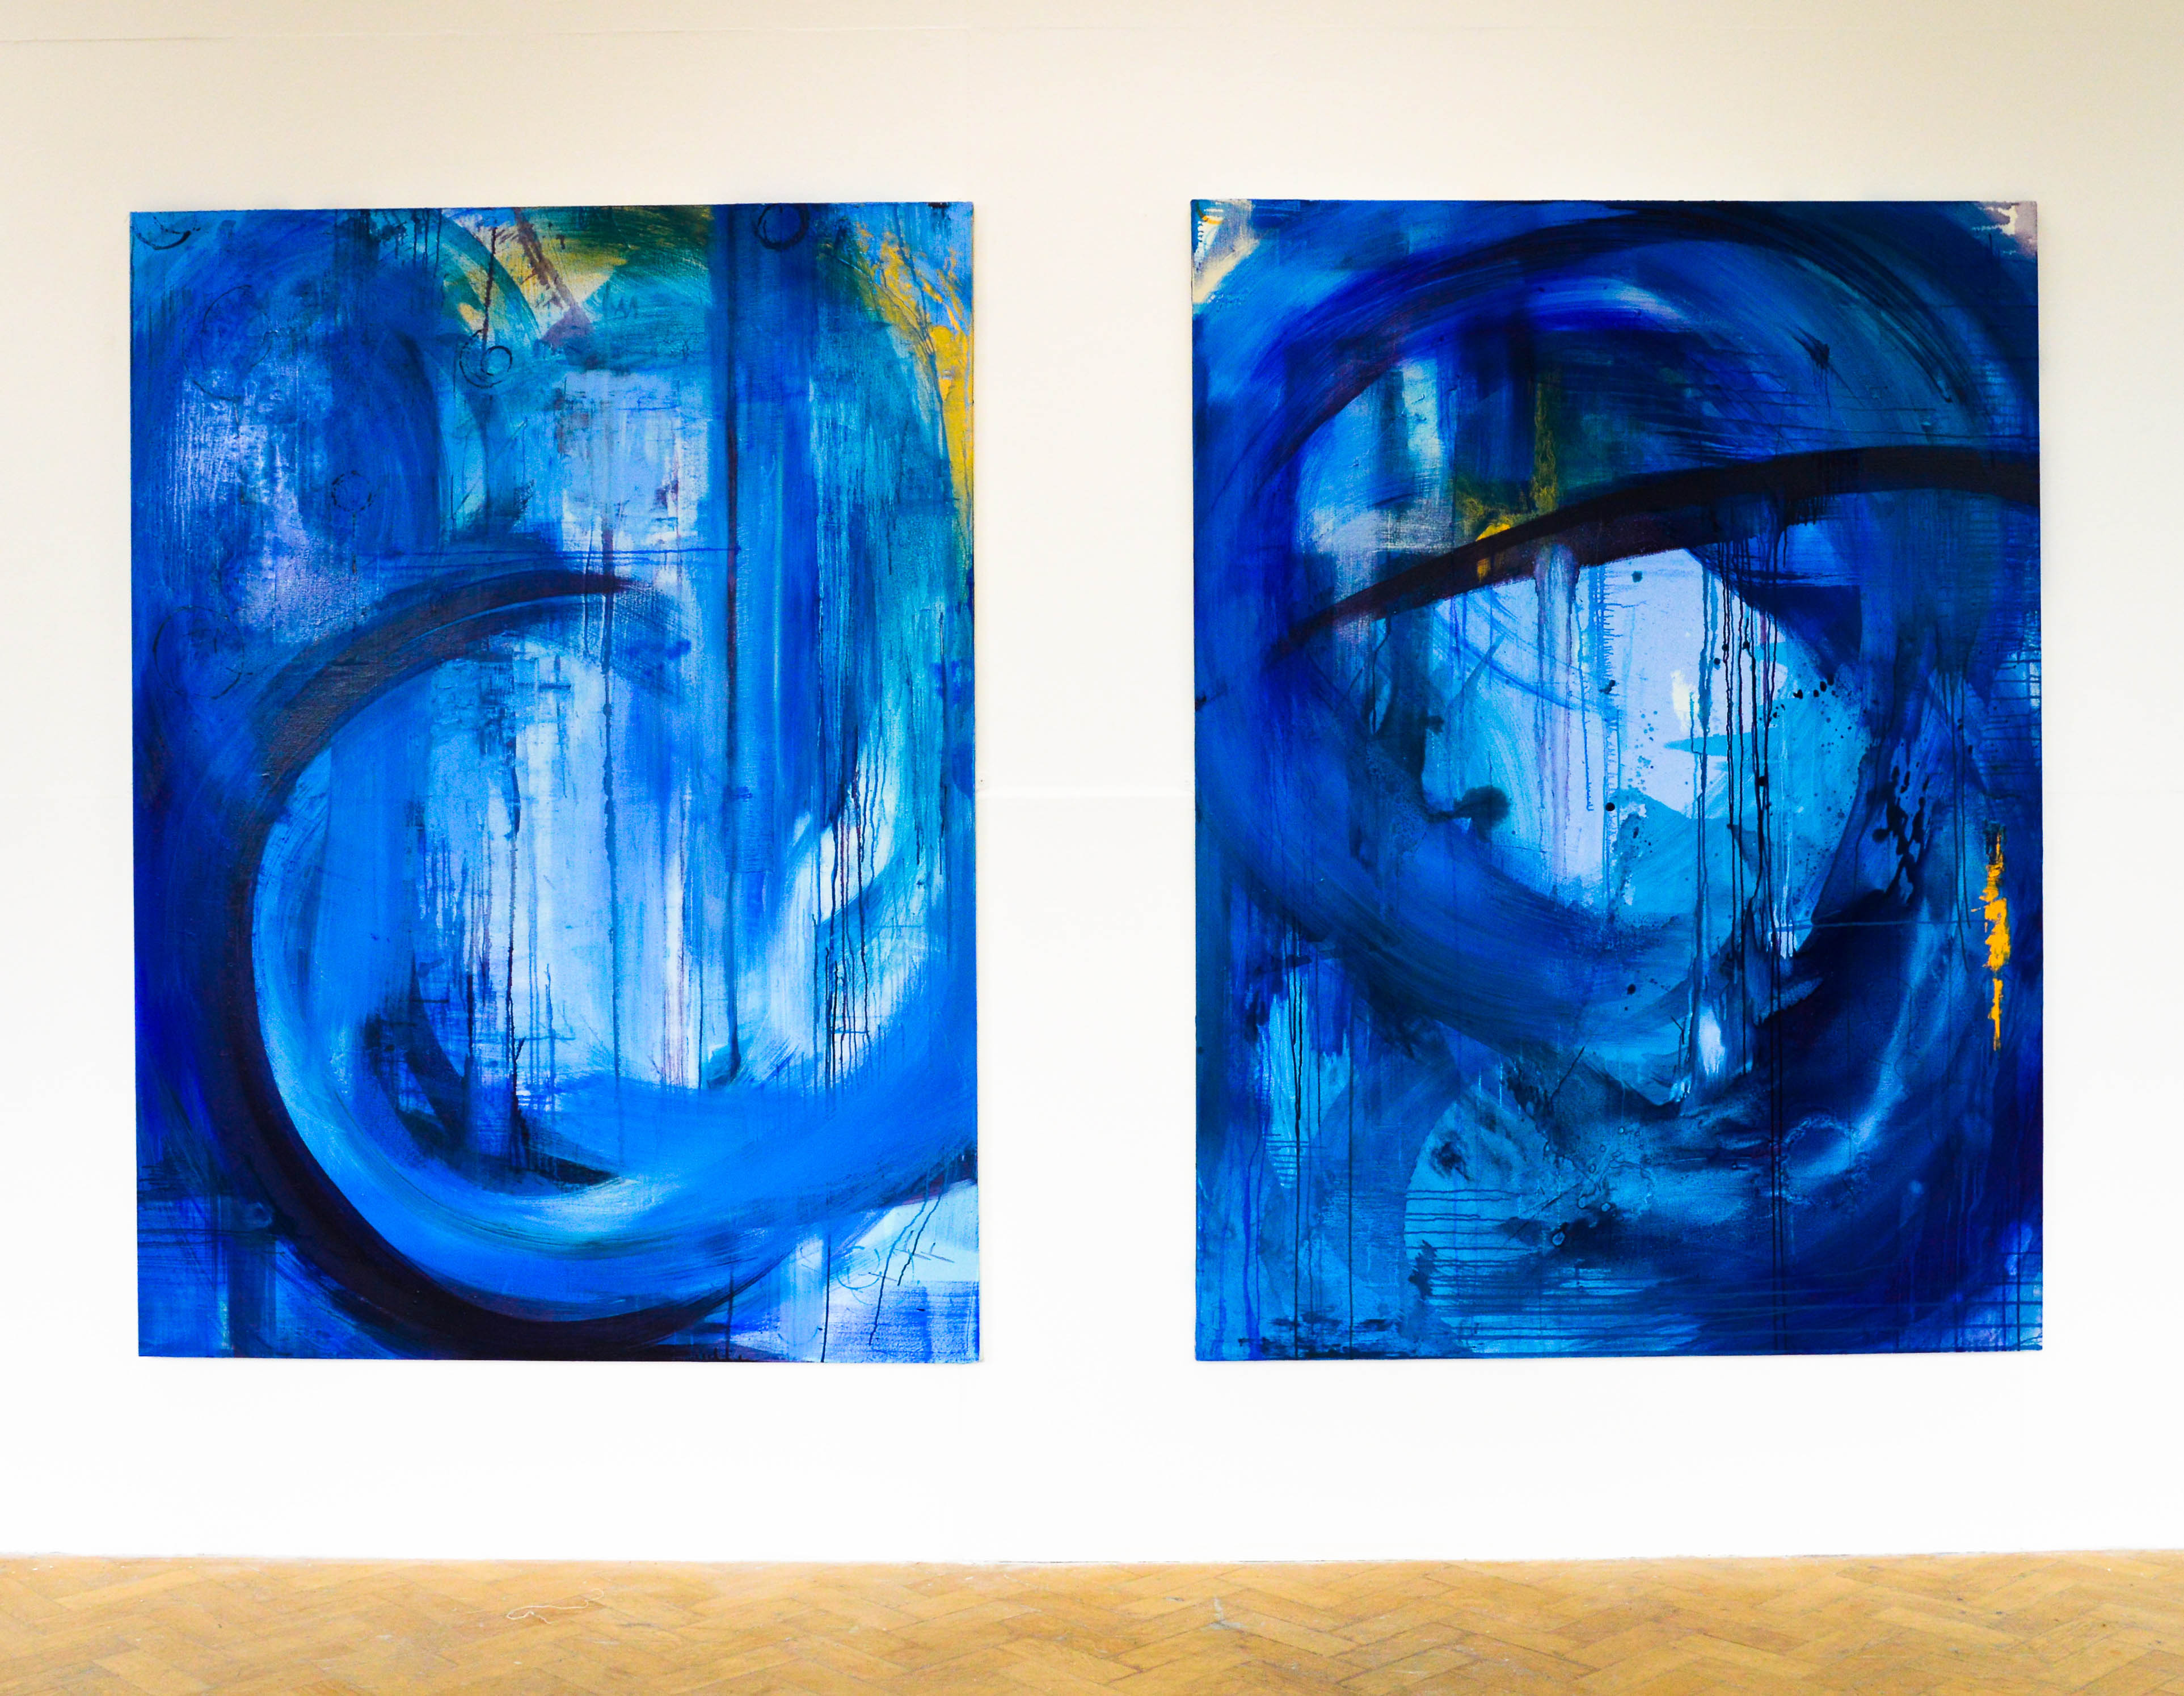 Blue Series 2. Oil on canvas. Diptych. 182.9x134.5cm. For sale.